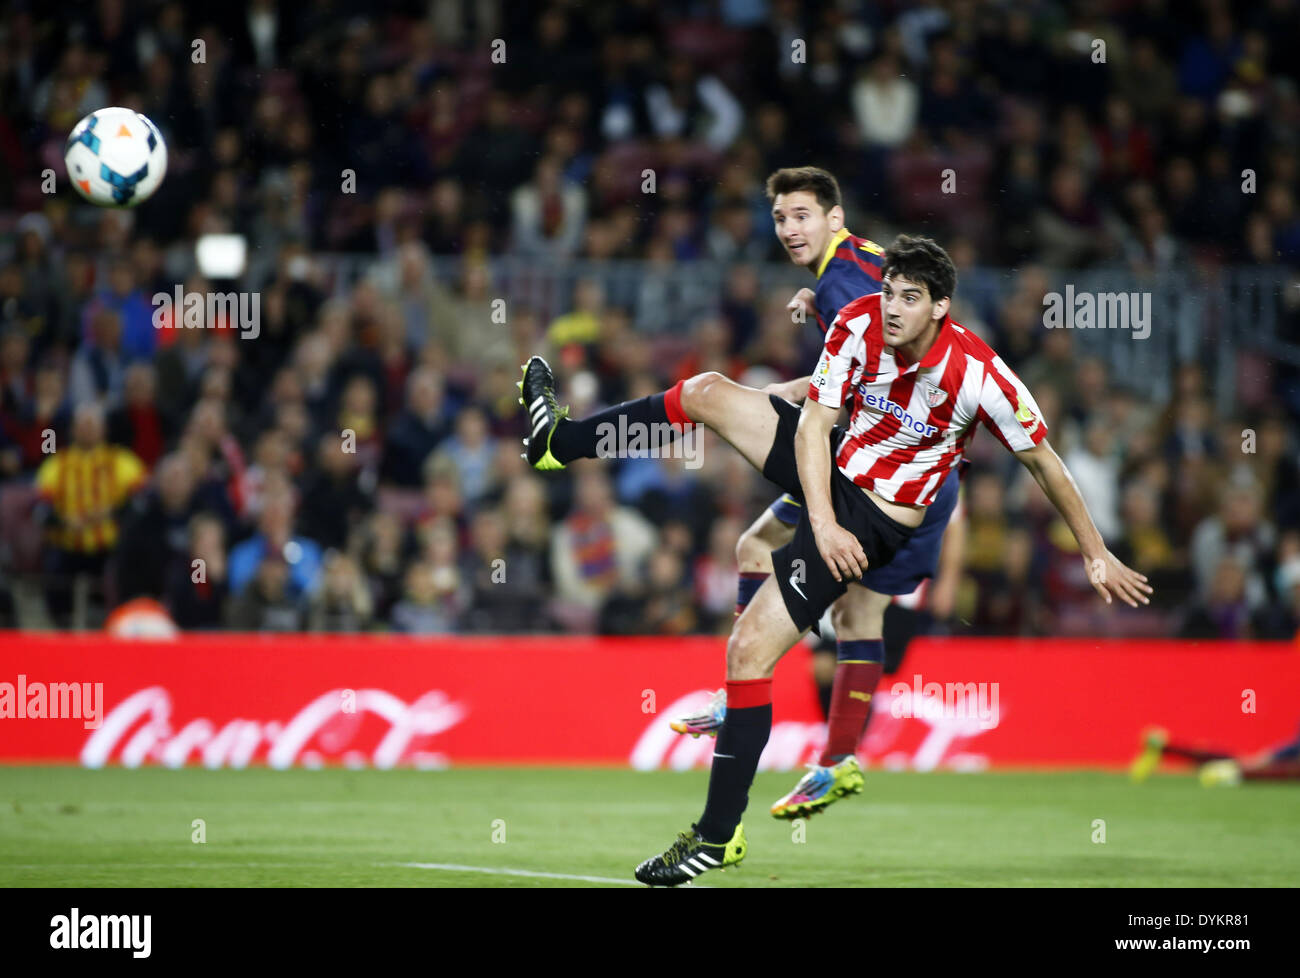 Barcelona, Spain. 20th Apr, 2014. BARCELONA-SPAIN -20 April. LeoMessi shot in the match between FC Barcelona and Athletic Bilbao, for Week 34 of the spanish League played at the Camp Nou on April 20, 2014 Photo: Aline Delfim/Urbanandsport/NurPhoto © Aline Delfim/NurPhoto/ZUMAPRESS.com/Alamy Live News Stock Photo